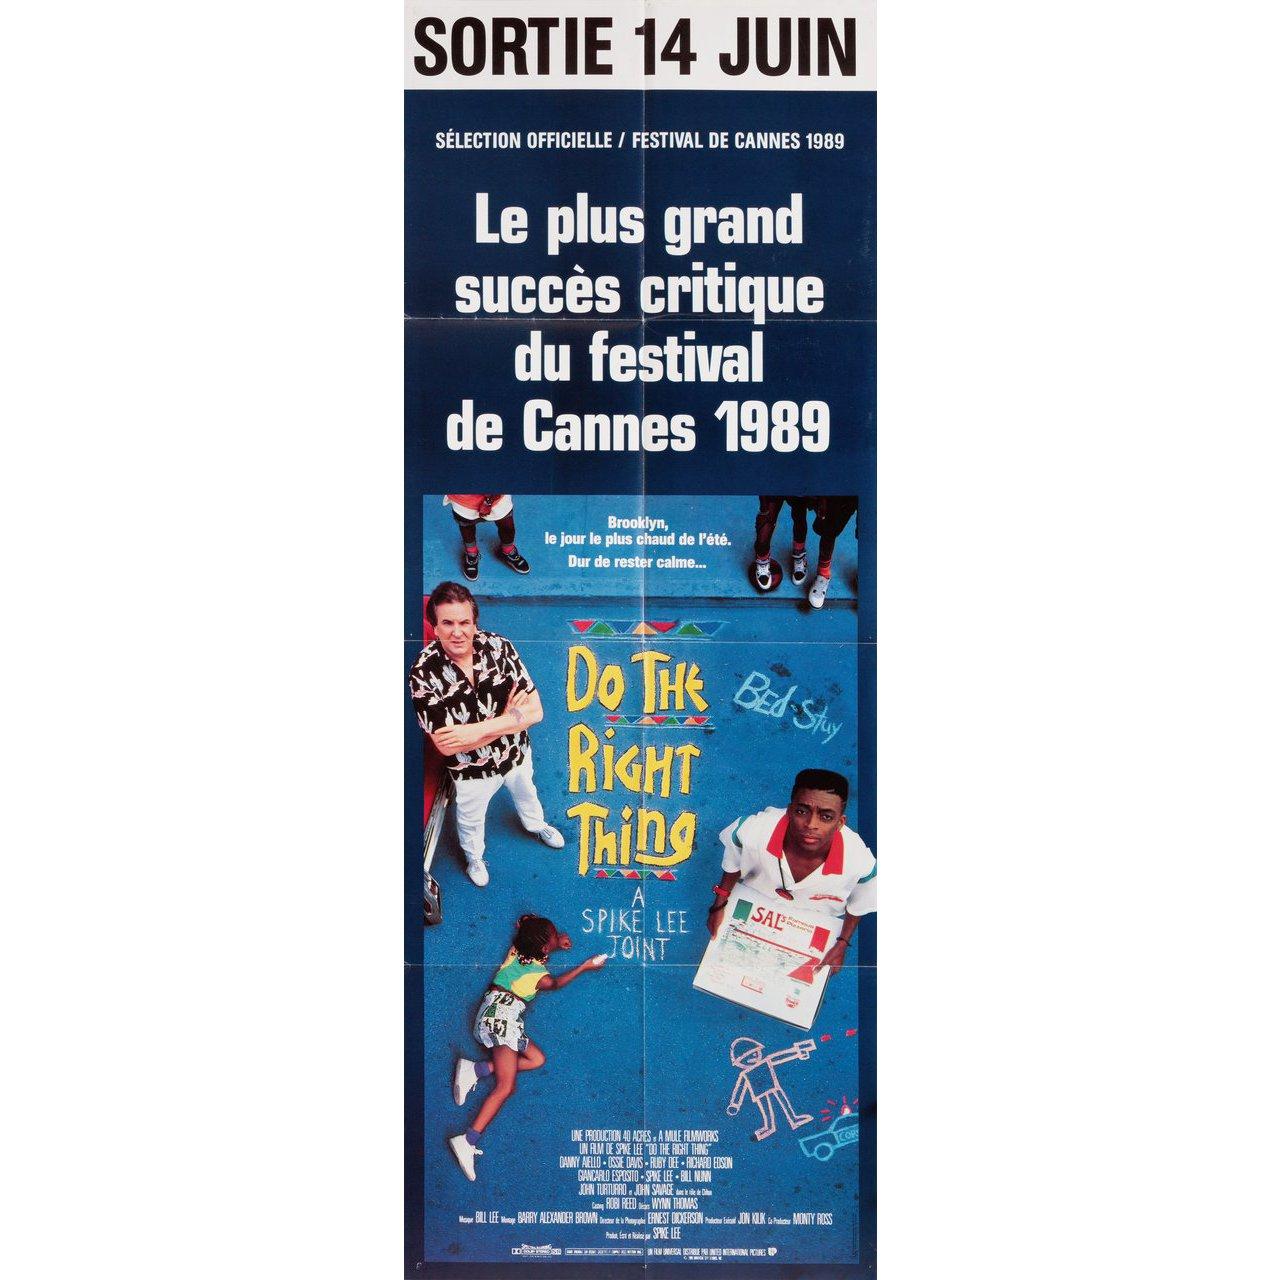 Original 1989 French pantalon poster for the film Do the Right Thing directed by Spike Lee with Danny Aiello / John Turturro / Ossie Davis / Ruby Dee / Richard Edson. Very Good-Fine condition, folded. Many original posters were issued folded or were